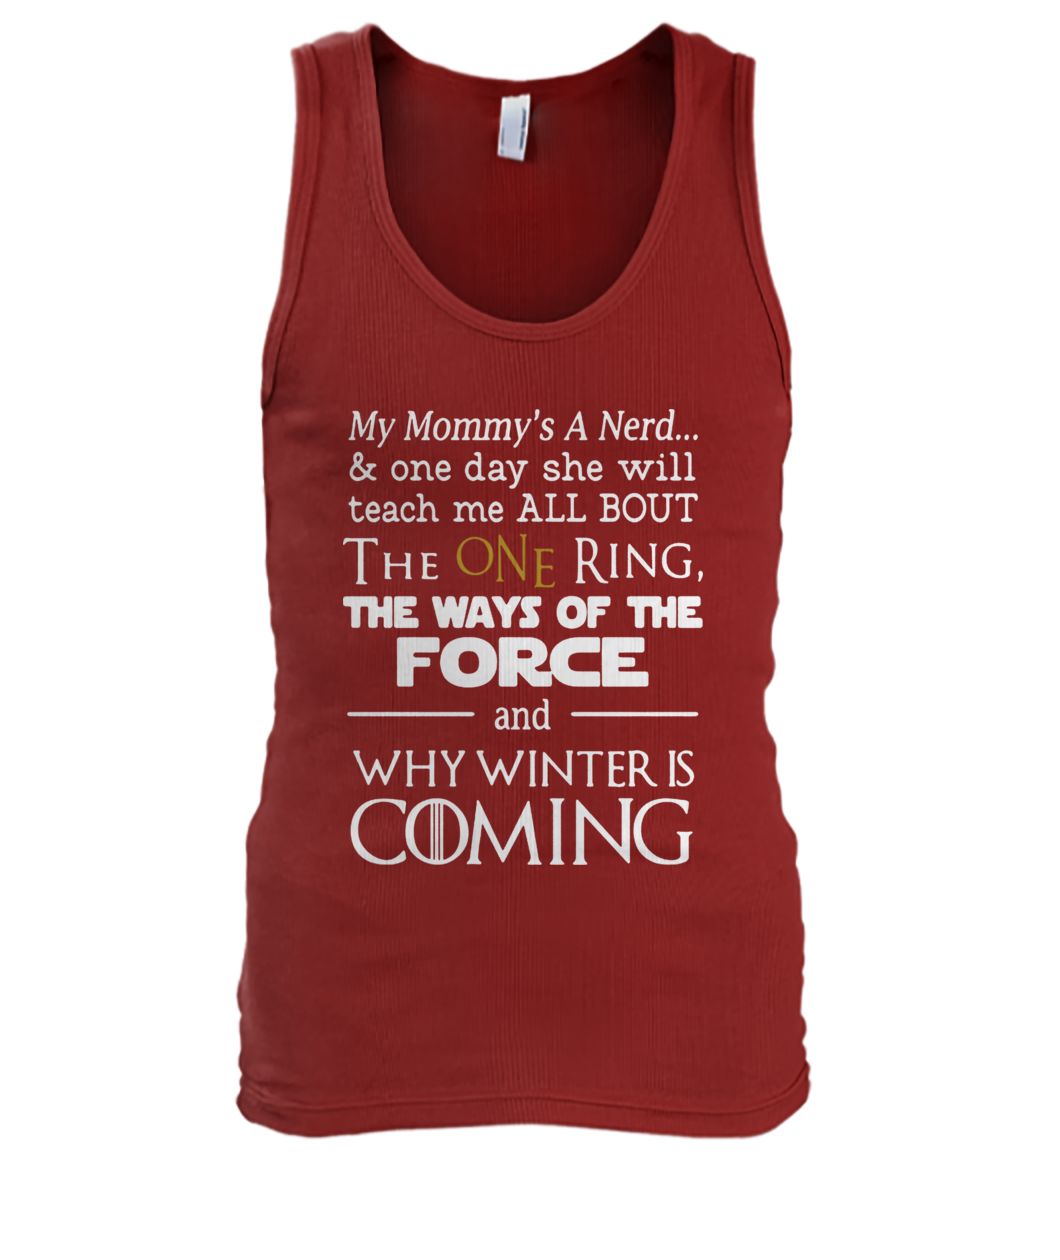 Game of thrones my mommy's a nerd and why winter is coming men's tank top